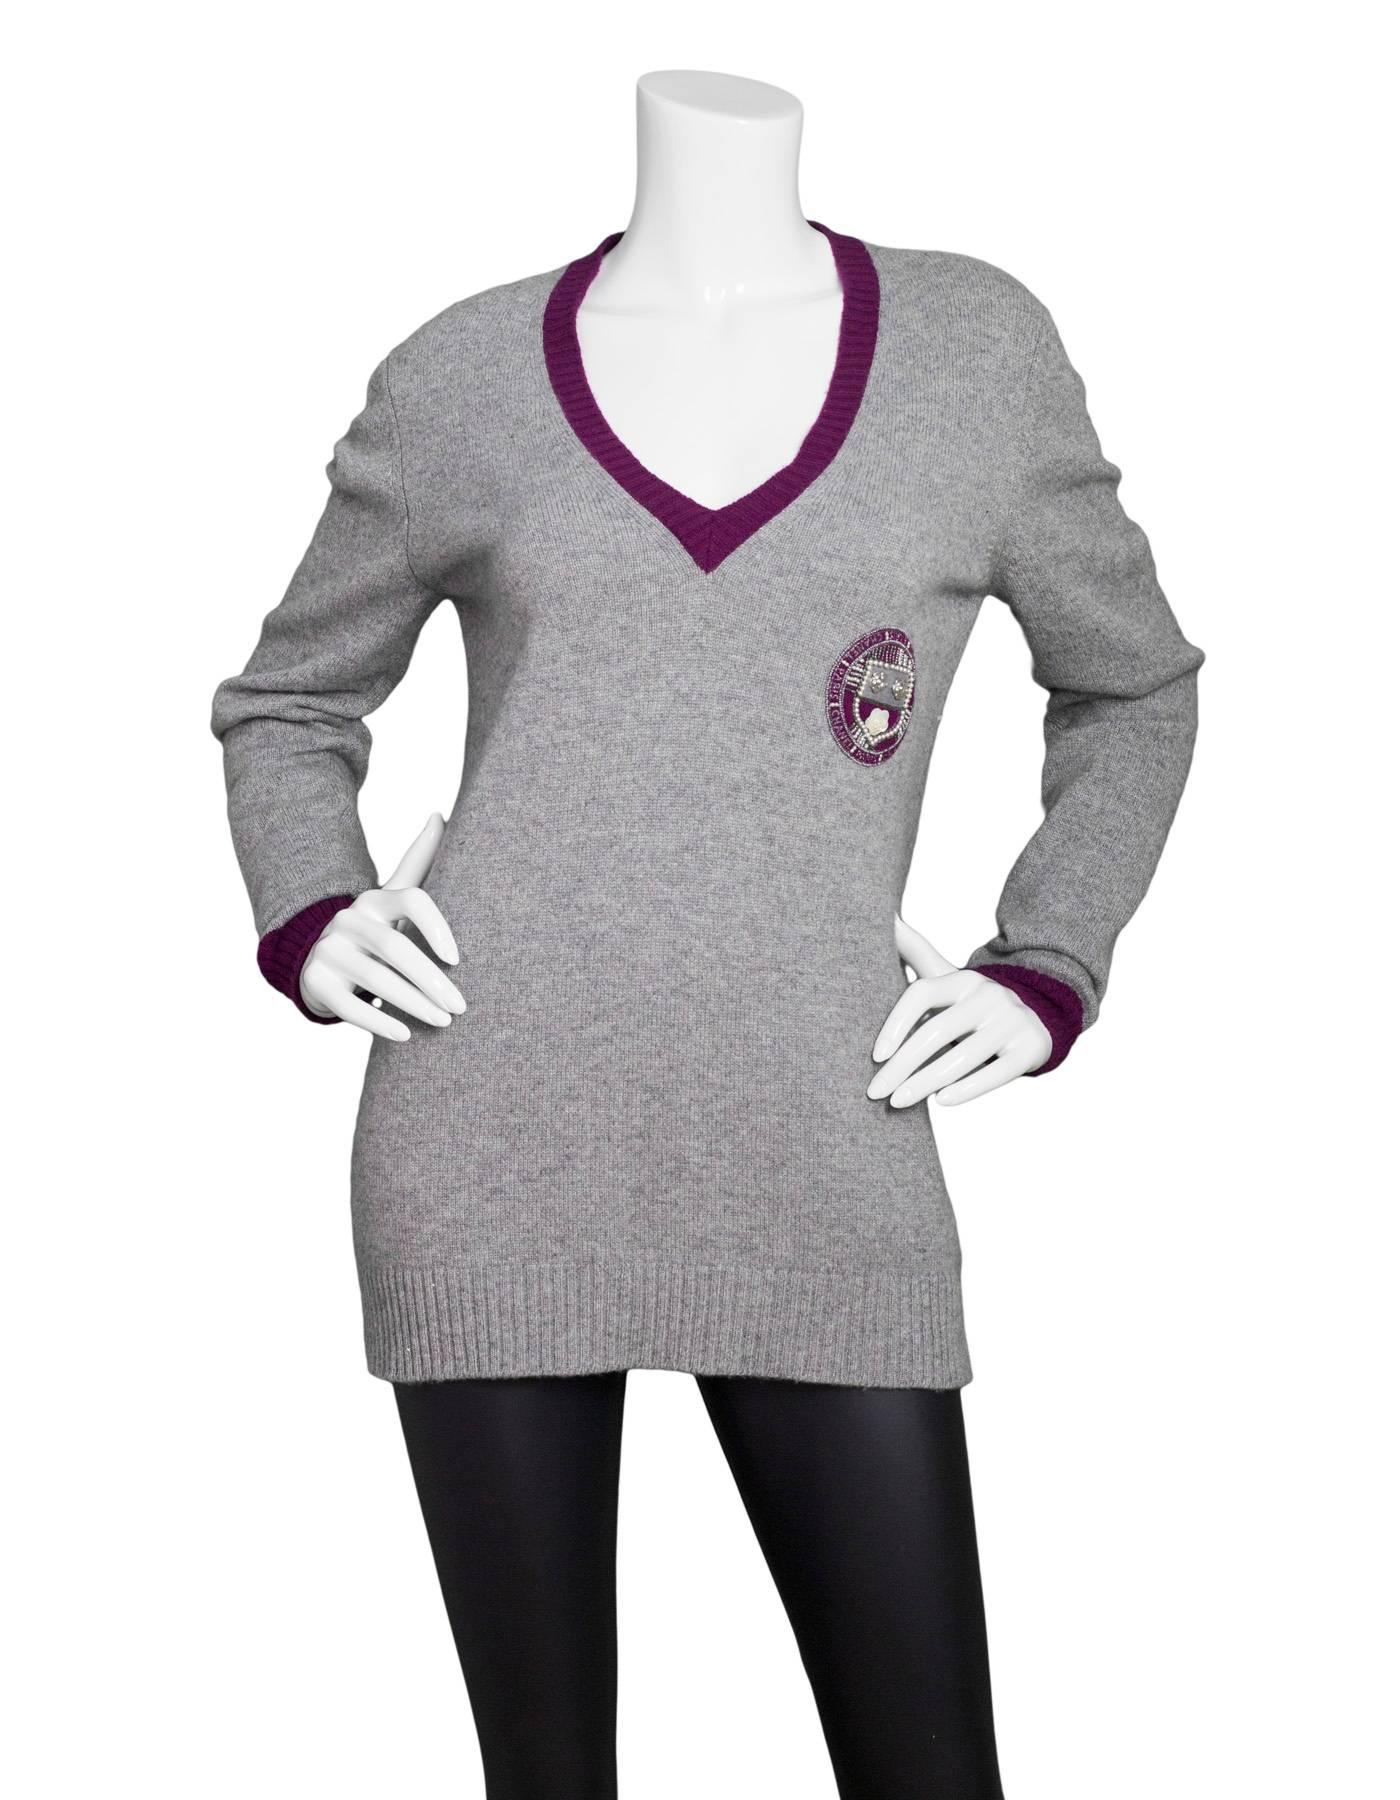 Chanel Grey Cashmere Prep-School Sweater
Features Burgundy trim & circular Chanel crest with sequin details

Made In: United Kingdom
Color: Grey and burgundy
Materials: 100% cashmere
Lining: None
Closure/Opening: Pull over
Exterior Pockets: